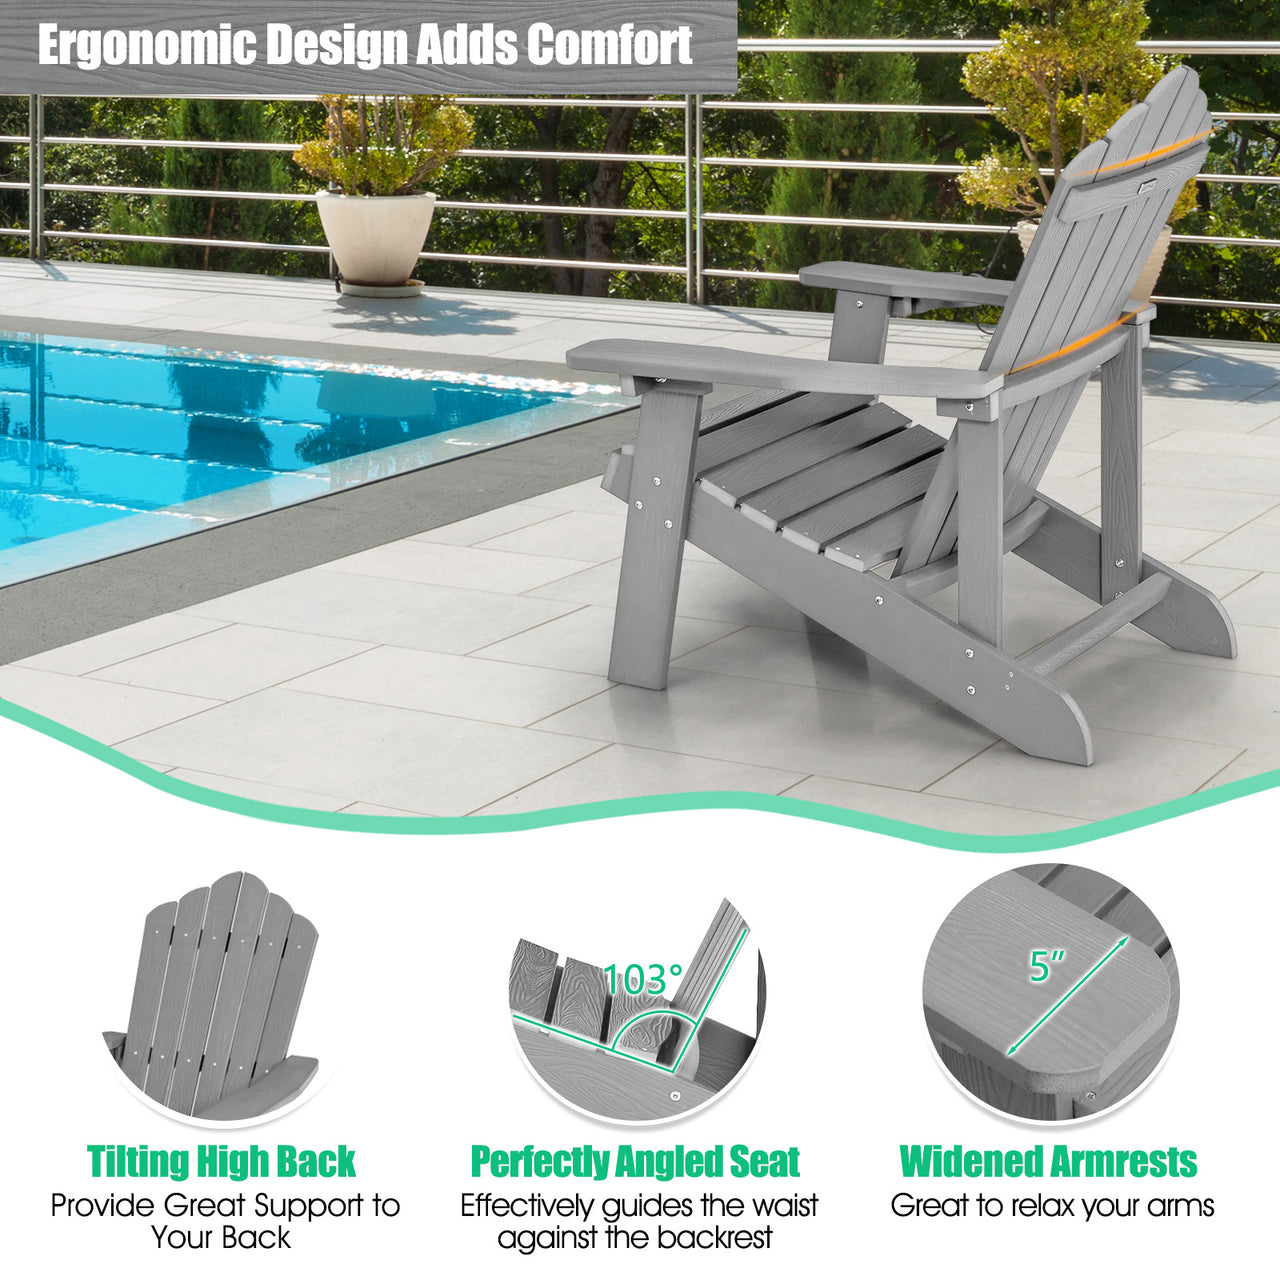 Weather Resistant HIPS Outdoor Adirondack Chair with Cup Holder - Gallery View 9 of 12